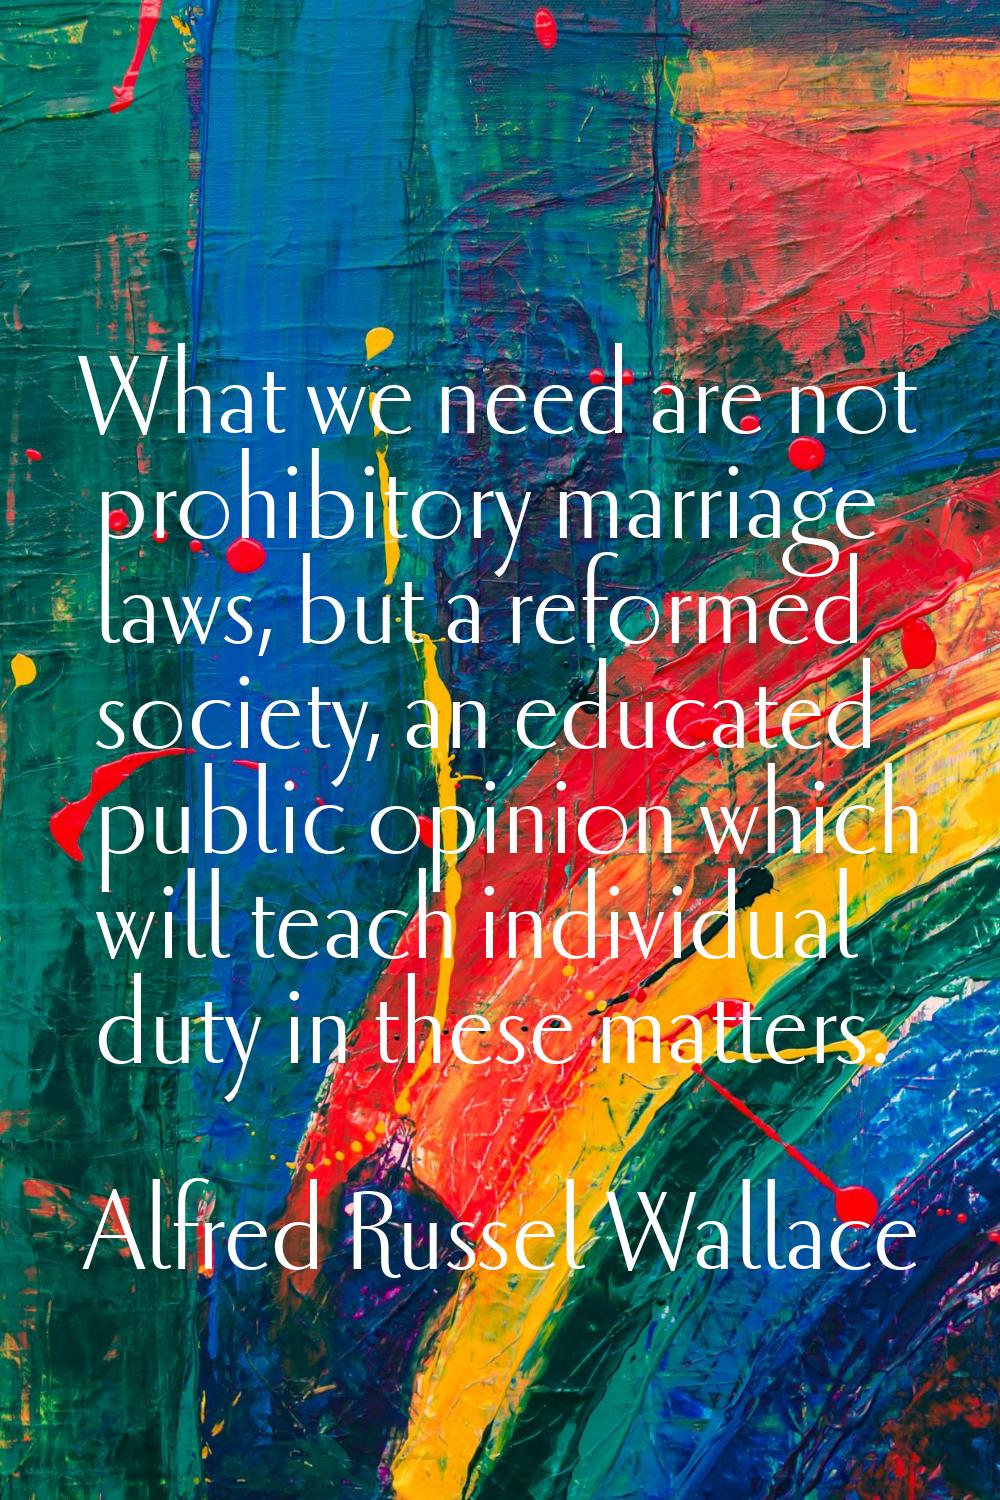 What we need are not prohibitory marriage laws, but a reformed society, an educated public opinion 